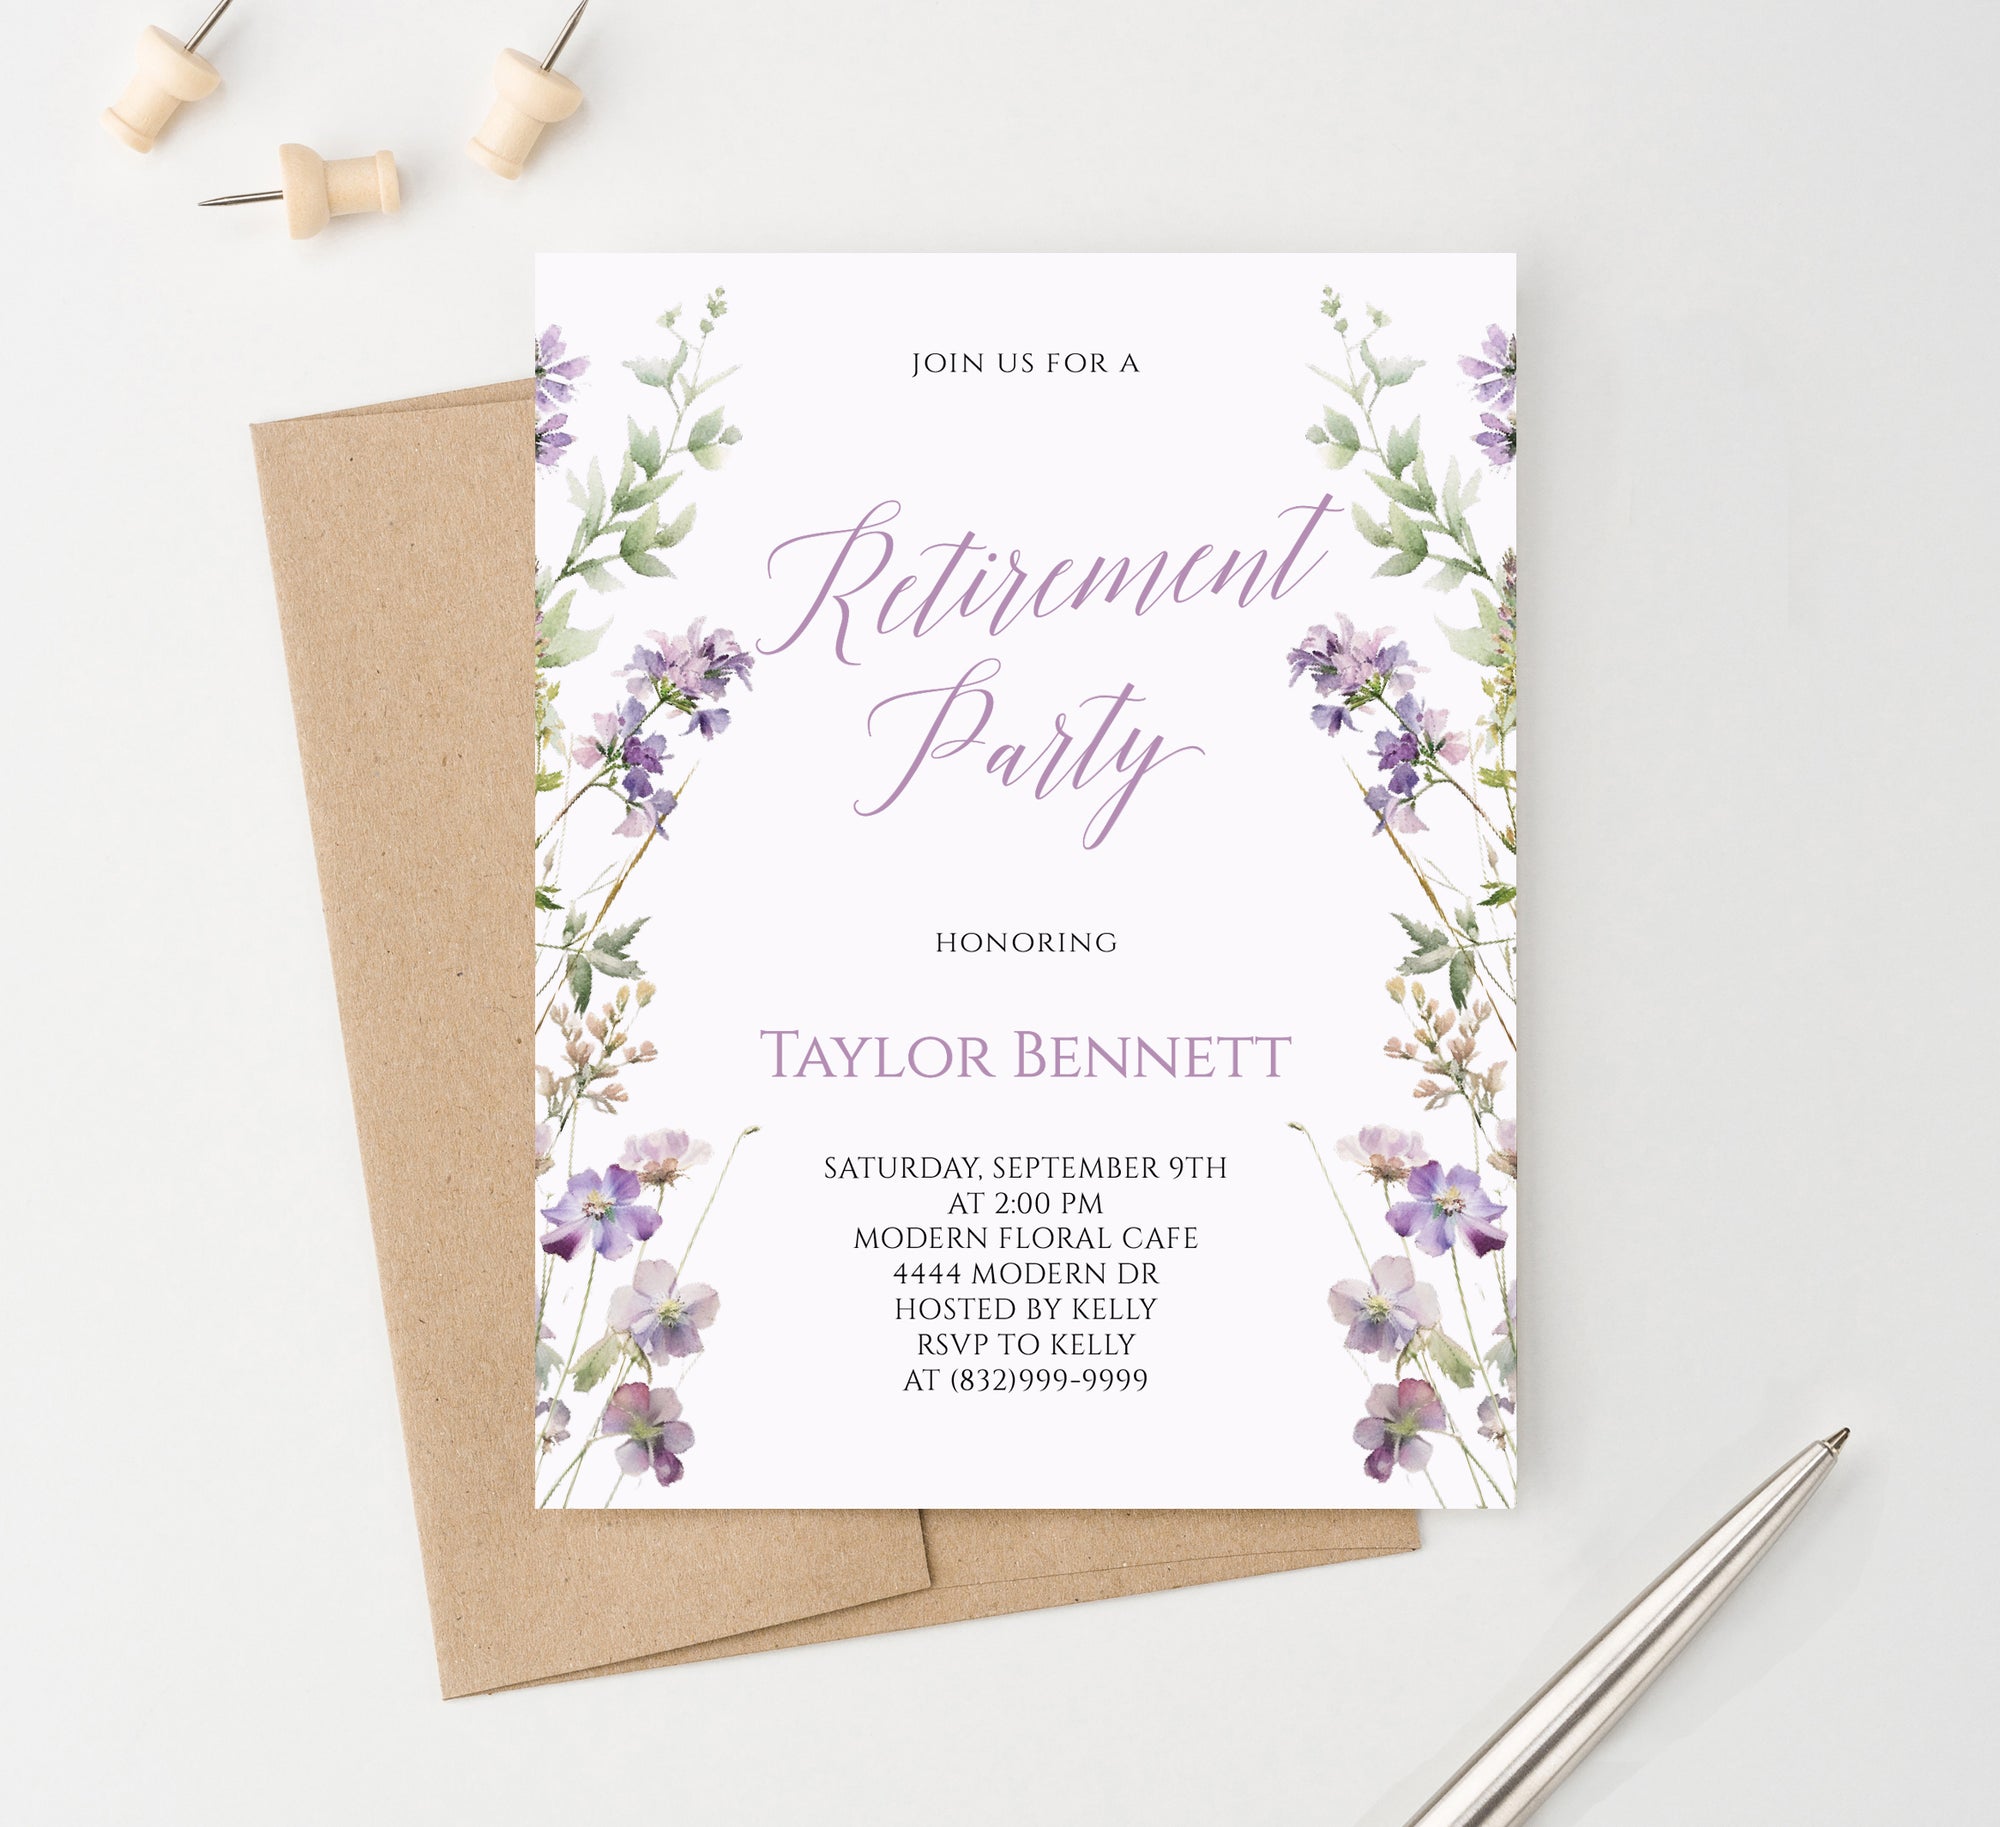 Classic Purple Floral Invitation Card For Retirement Party